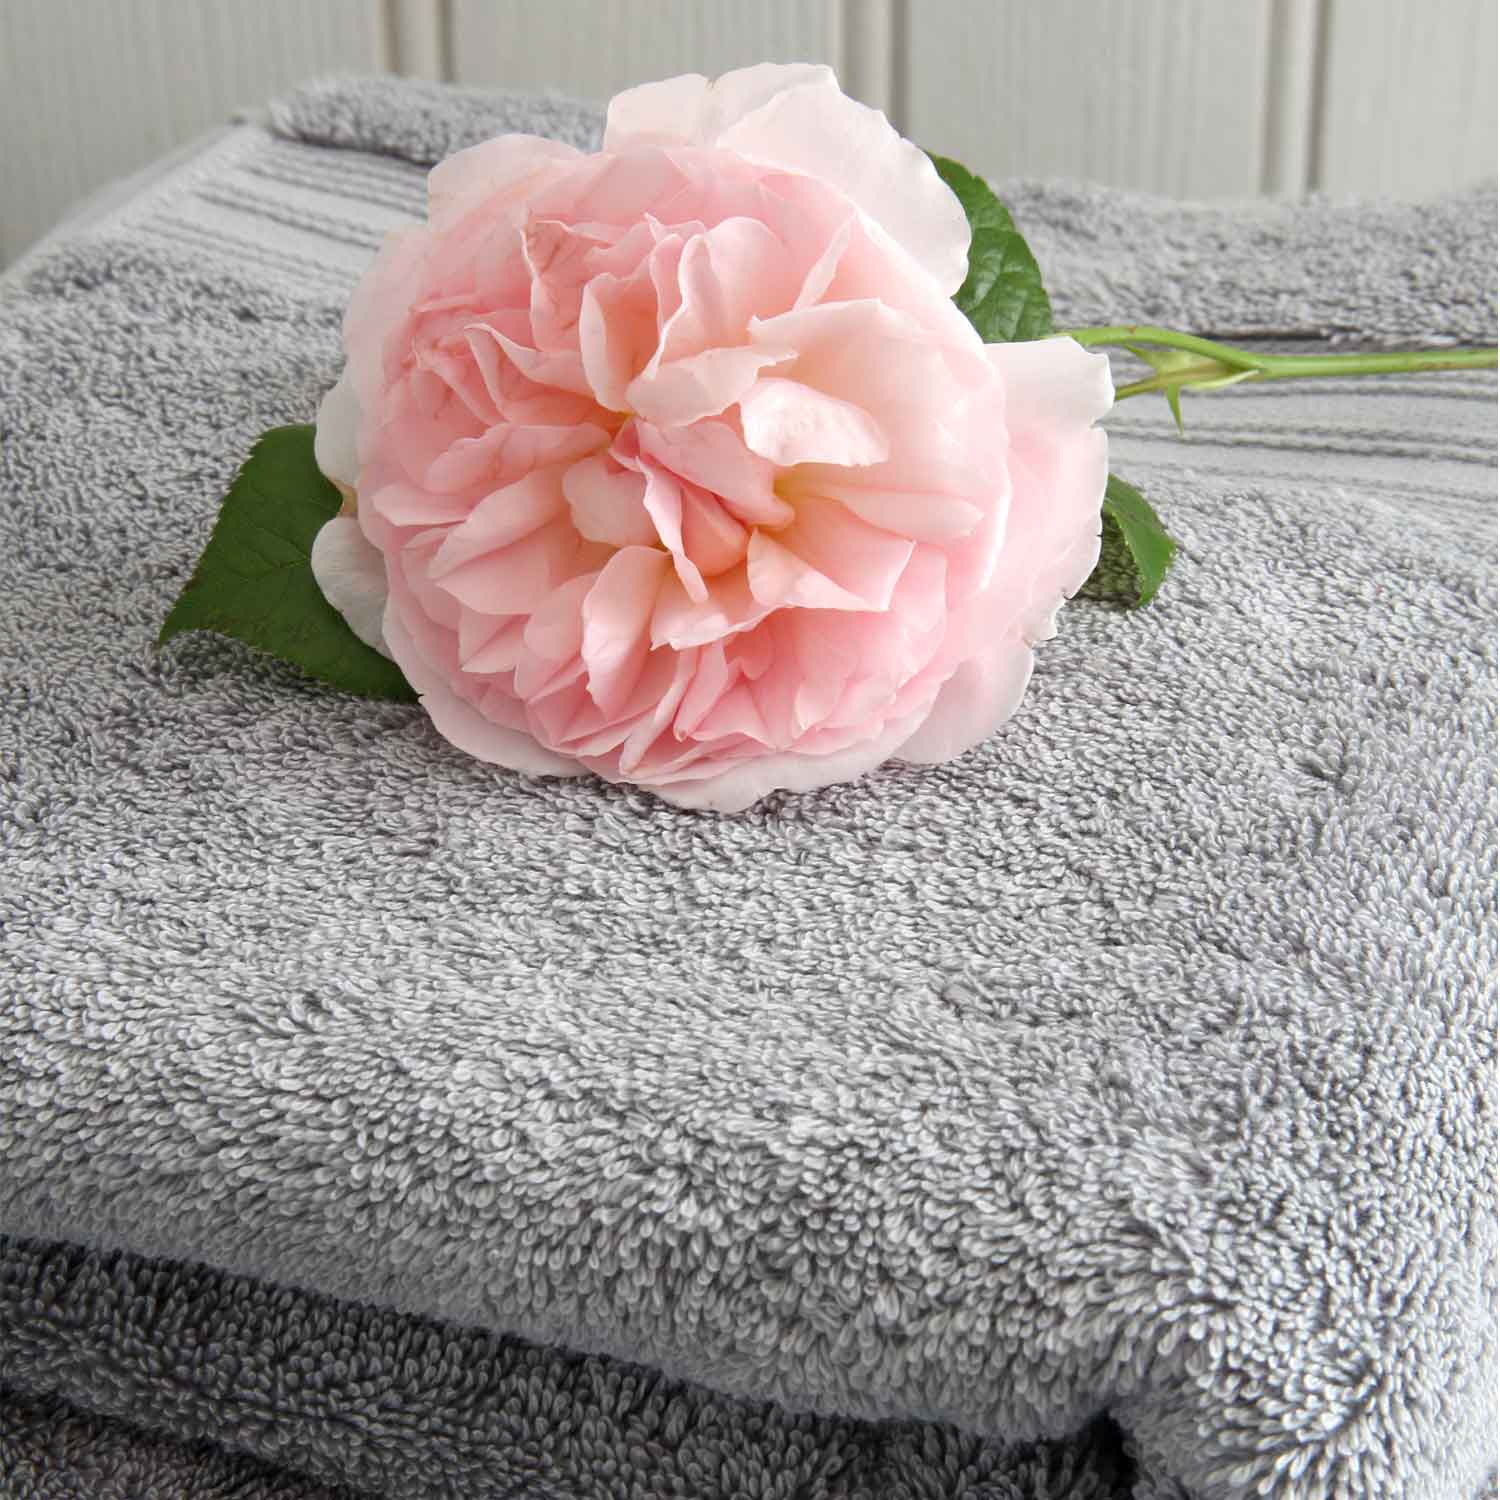 Grey Egyptian cotton towel folded with pink rose